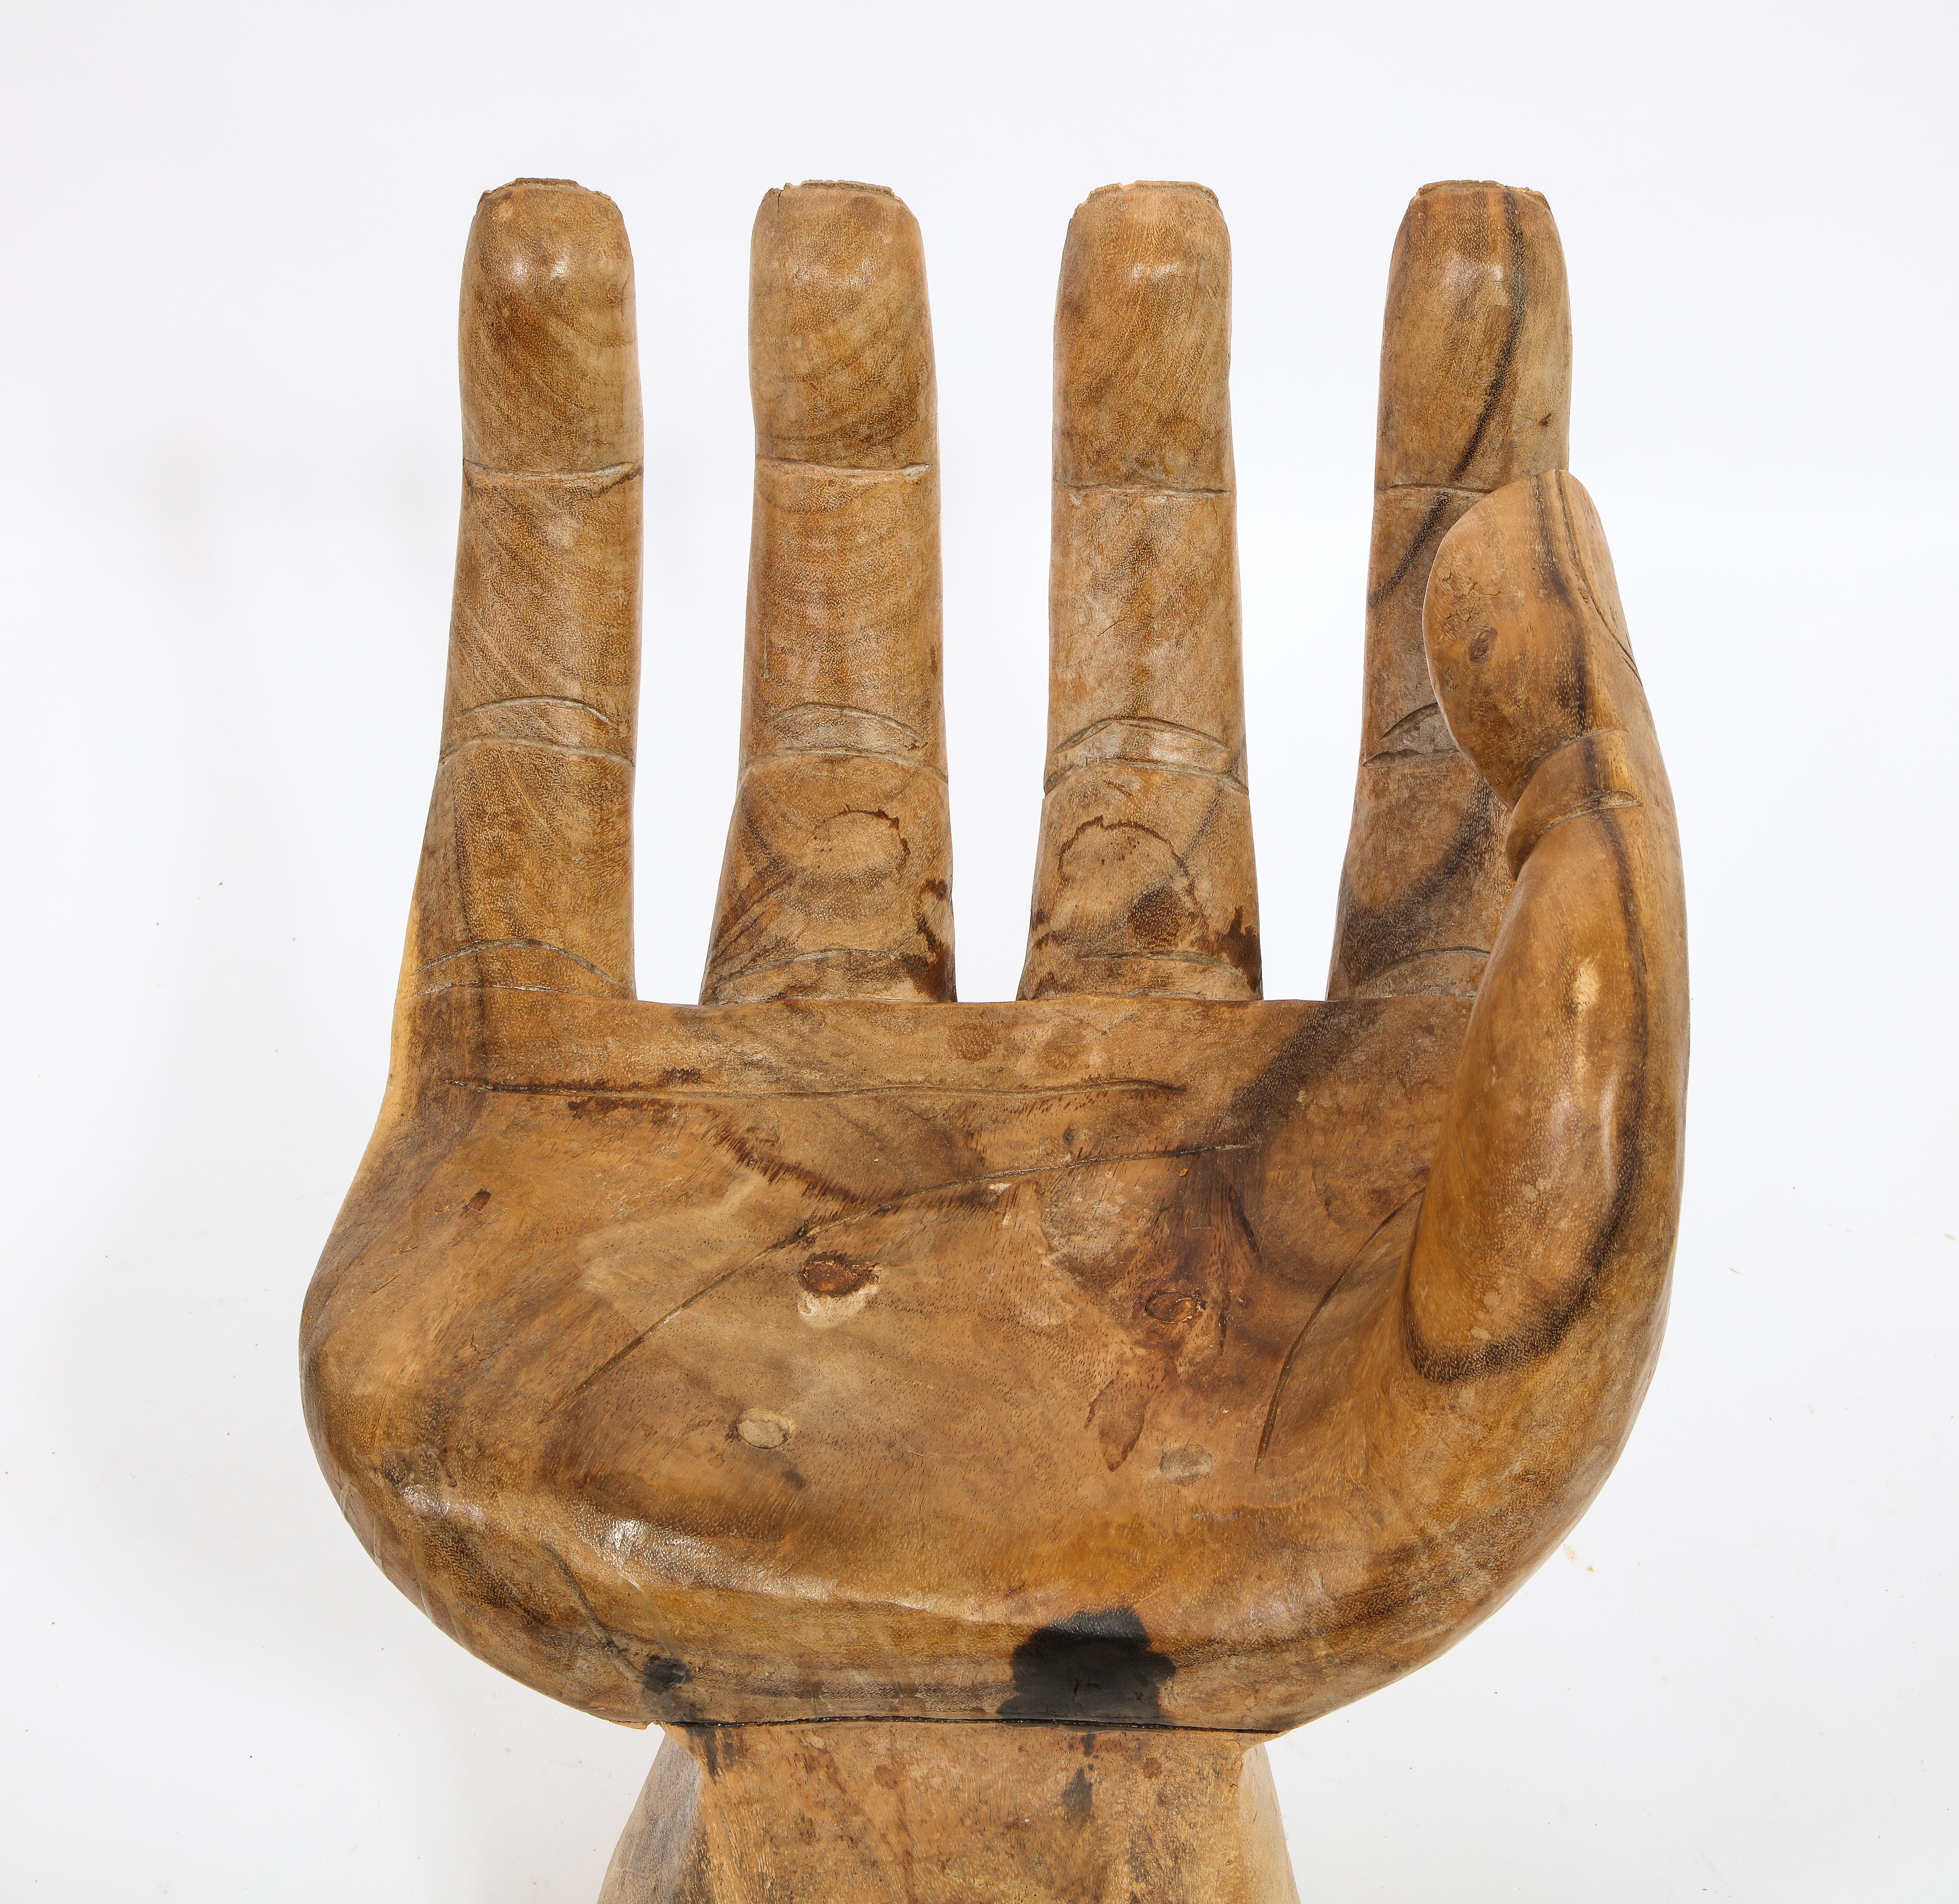 Carved hand stool in the manner of Pedro Friedberg. 3 sizes are available. This is the medium one.